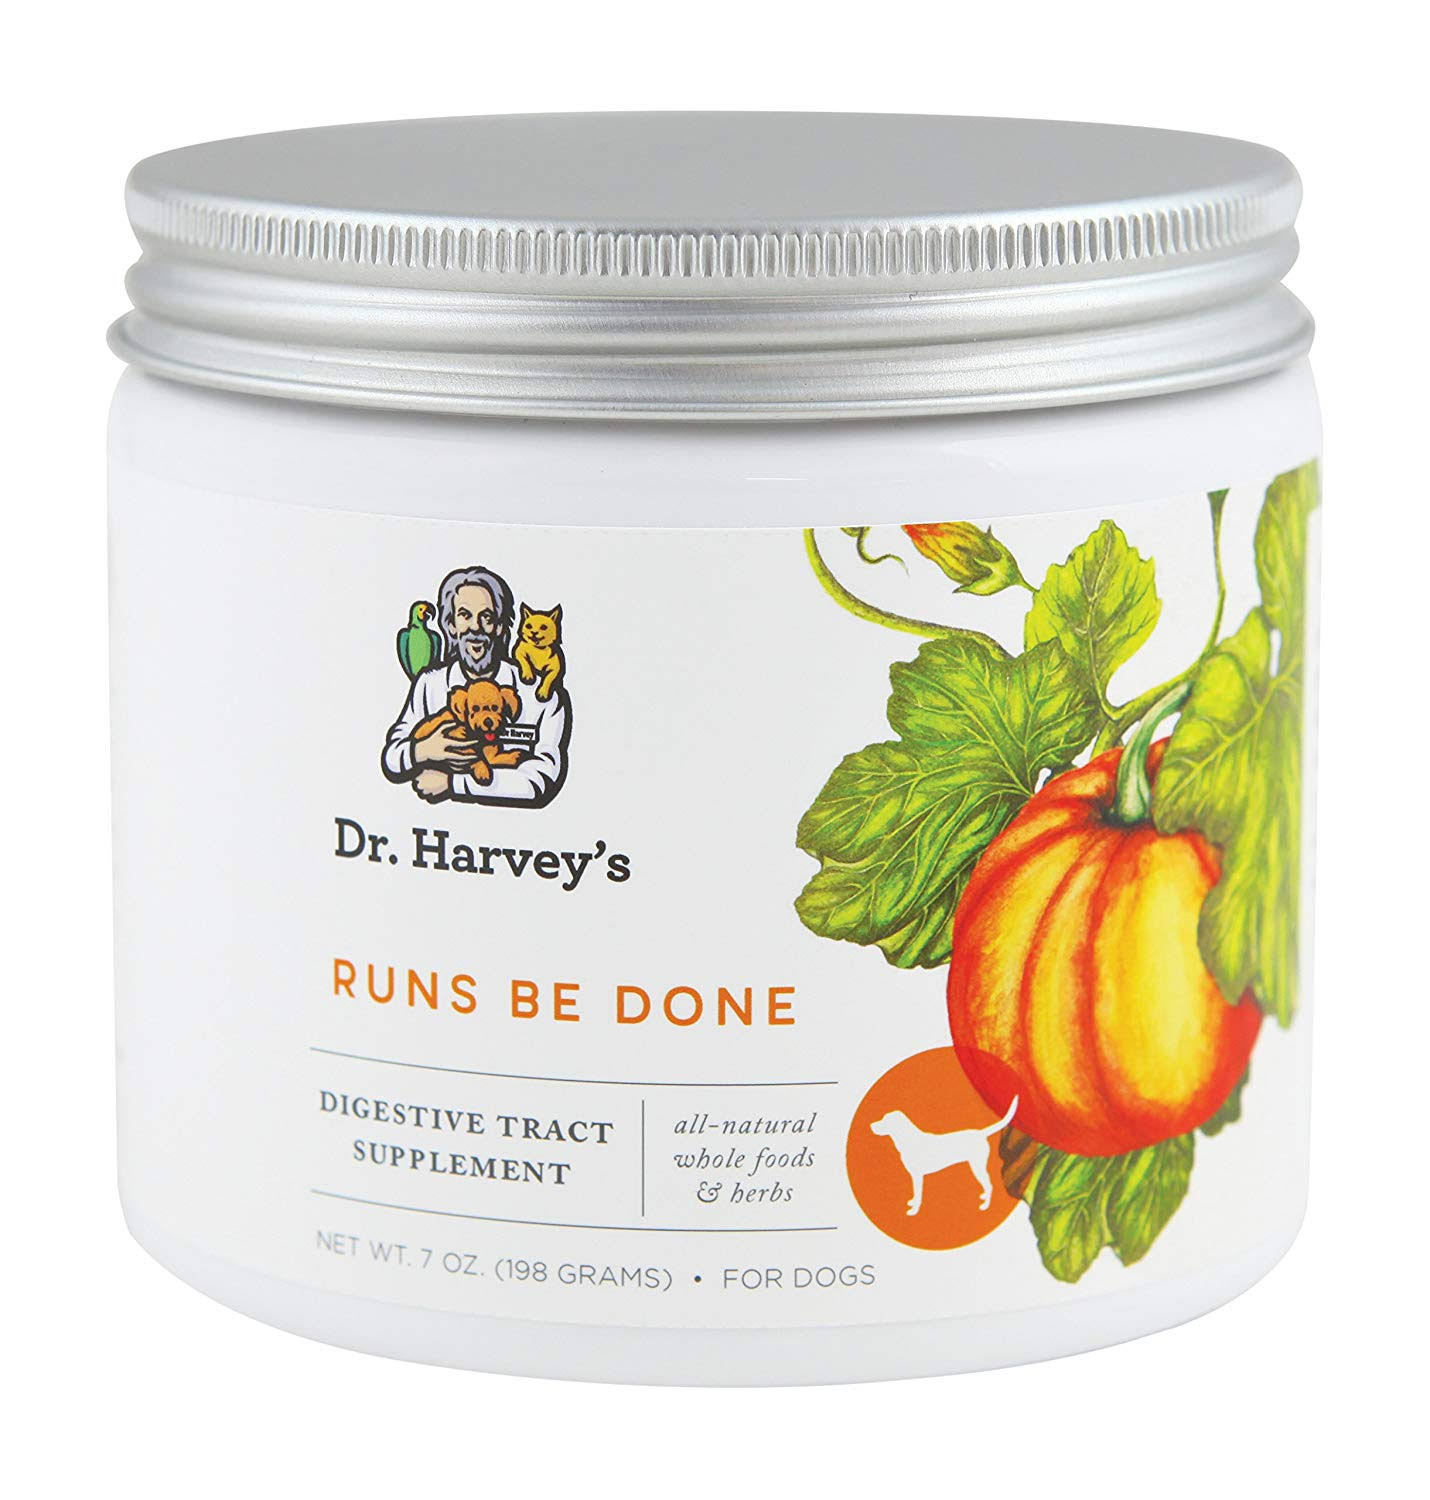 Dr Harvey's Runs Be Done Dog Digestive Tract Supplement - 7oz